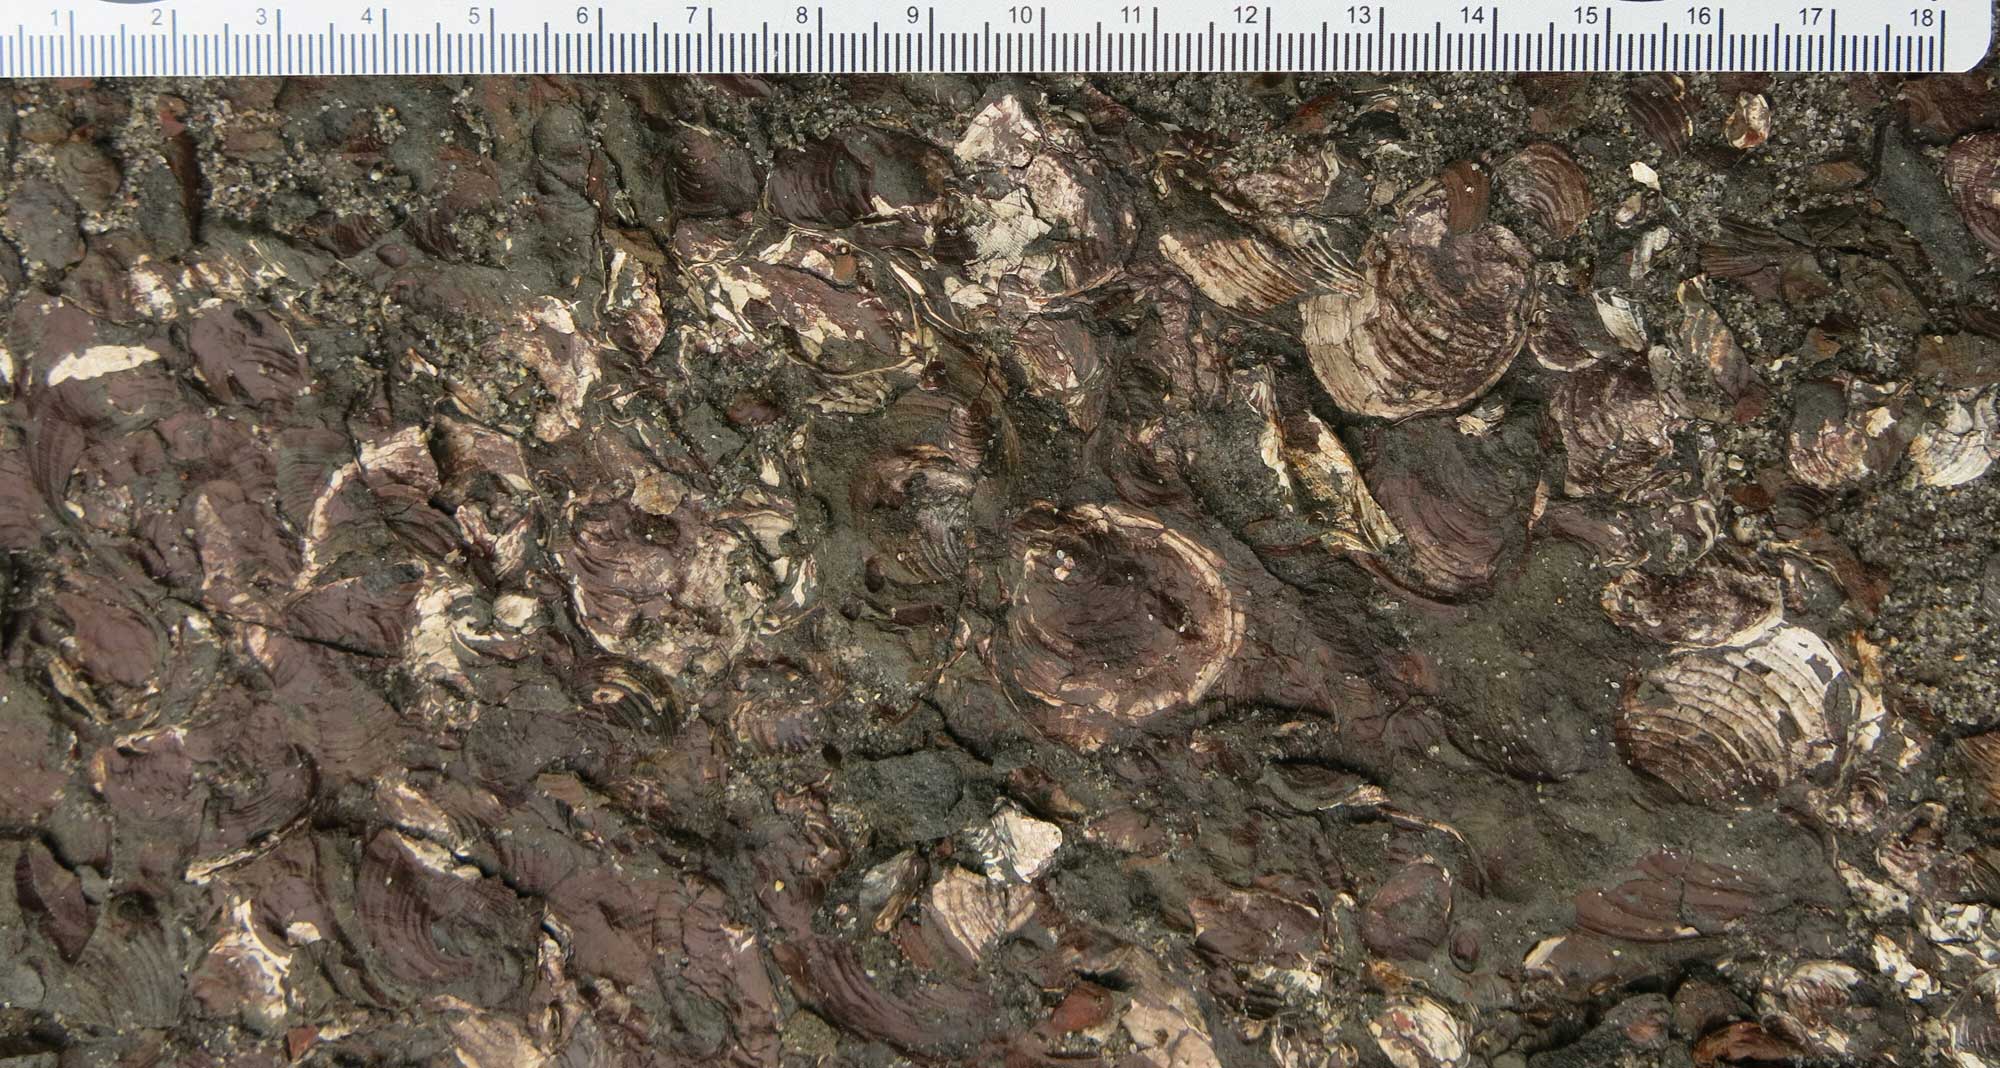 Photograph of a dark brown rock in which the white shells of a bivalve can be seen. A ruler at the top of the image measures 18 centimeters and extends nearly the entire image width.